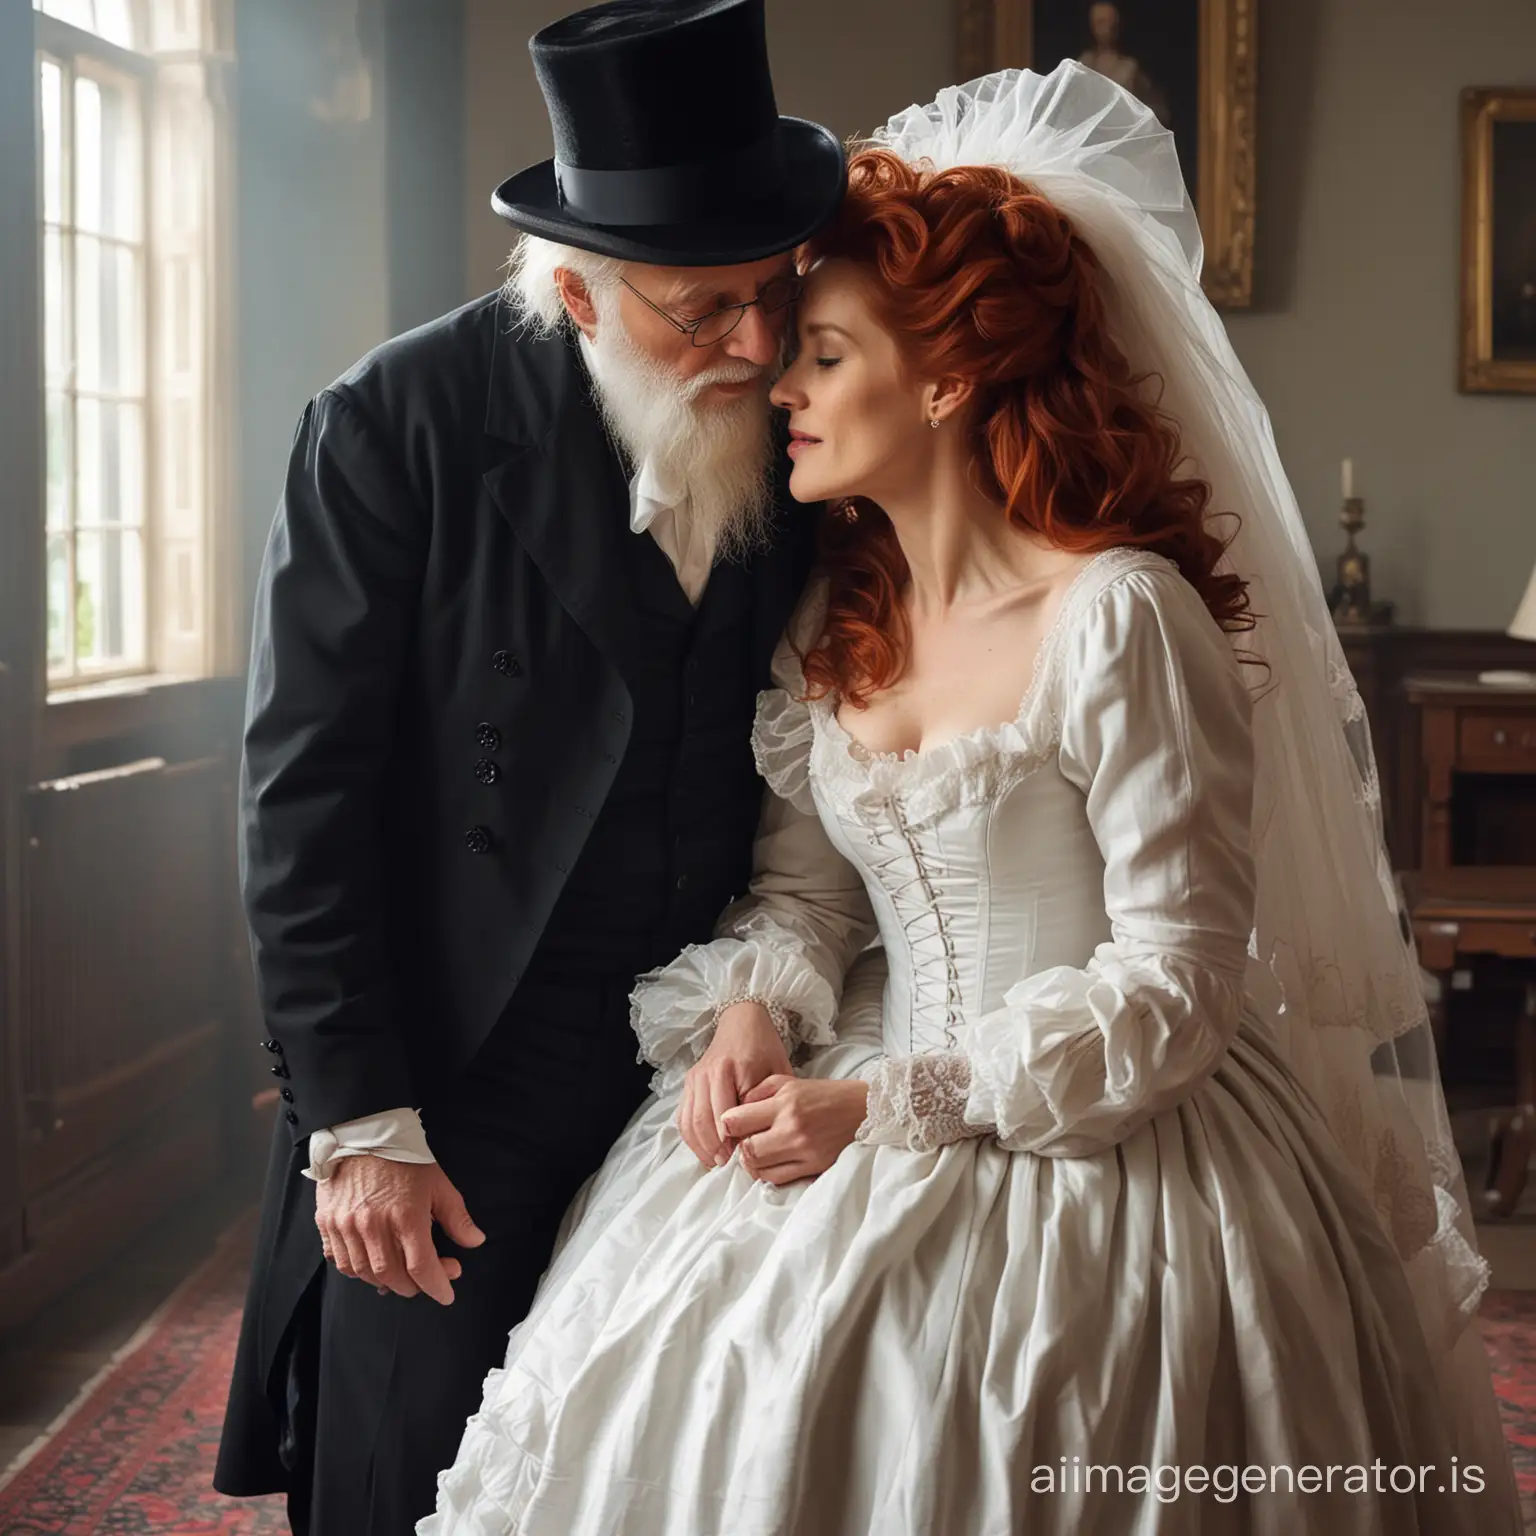 Romantic-Victorian-Newlyweds-Redhaired-Gillian-Anderson-Kissing-Her-Old-Man-Husband-in-Black-Crinoline-Dress